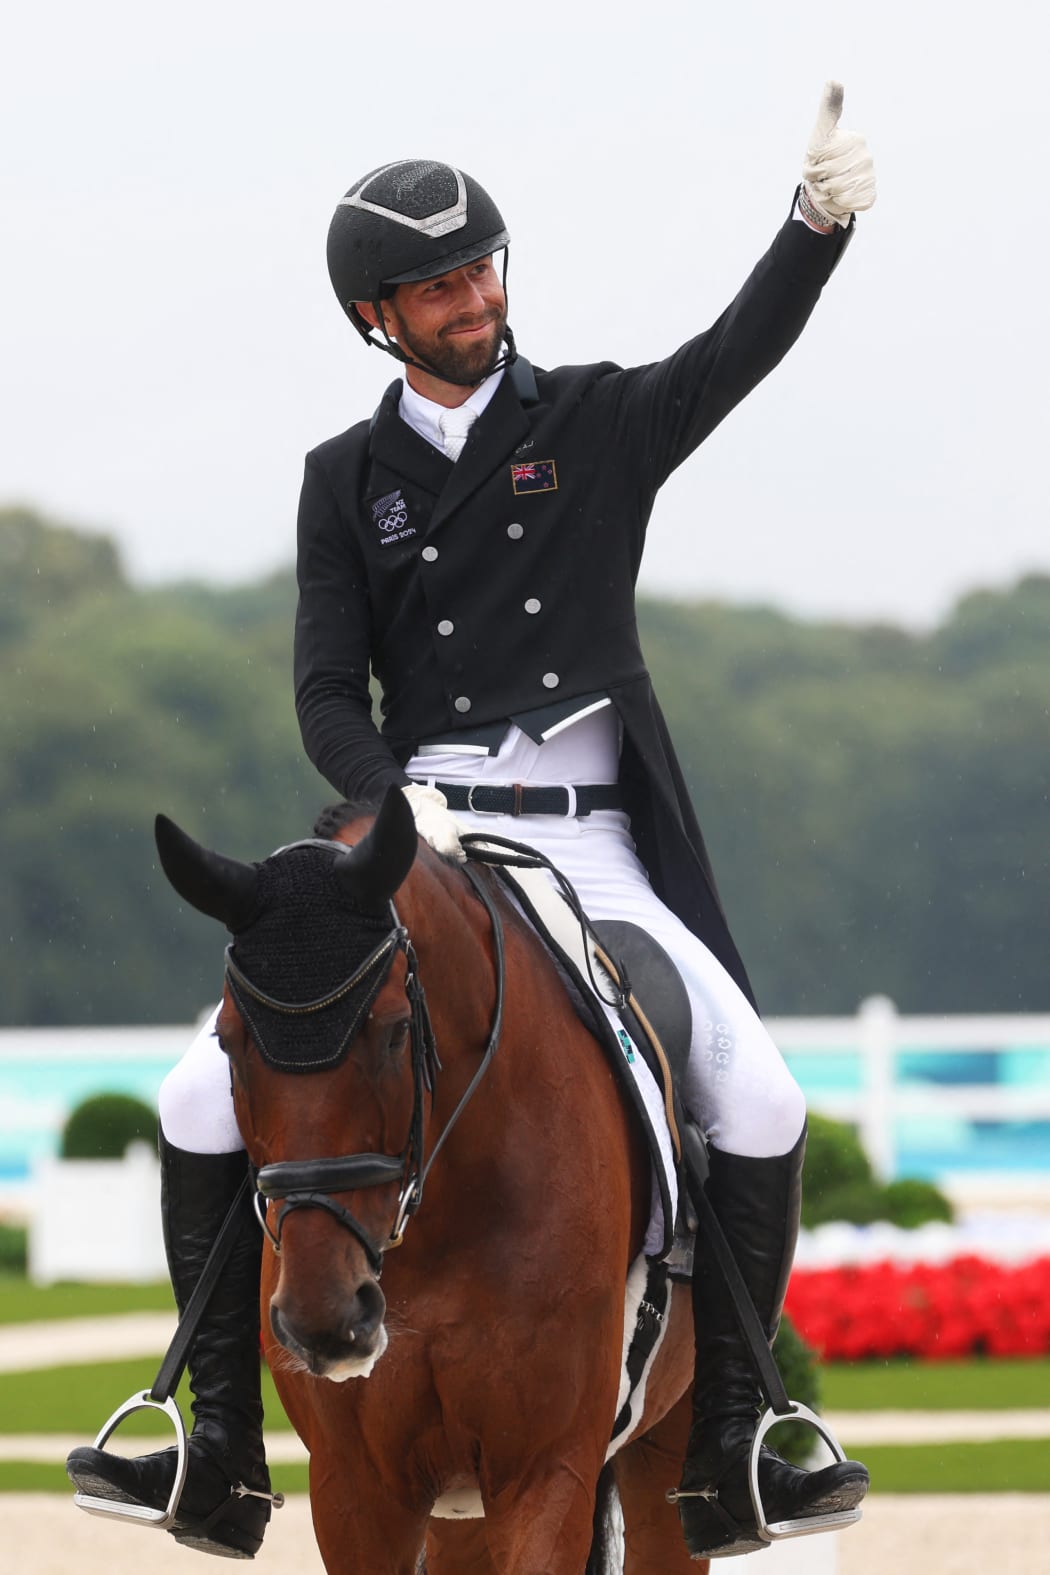 New Zealand's Clarke Johnstone on Menlo Park gives a thumbs-up as he competes in the equestrian dressage during the Paris 2024 Olympic Games at the Chateau de Versailles in Versailles on July 27, 2024. (Photo by Pierre-Philippe MARCOU / AFP)